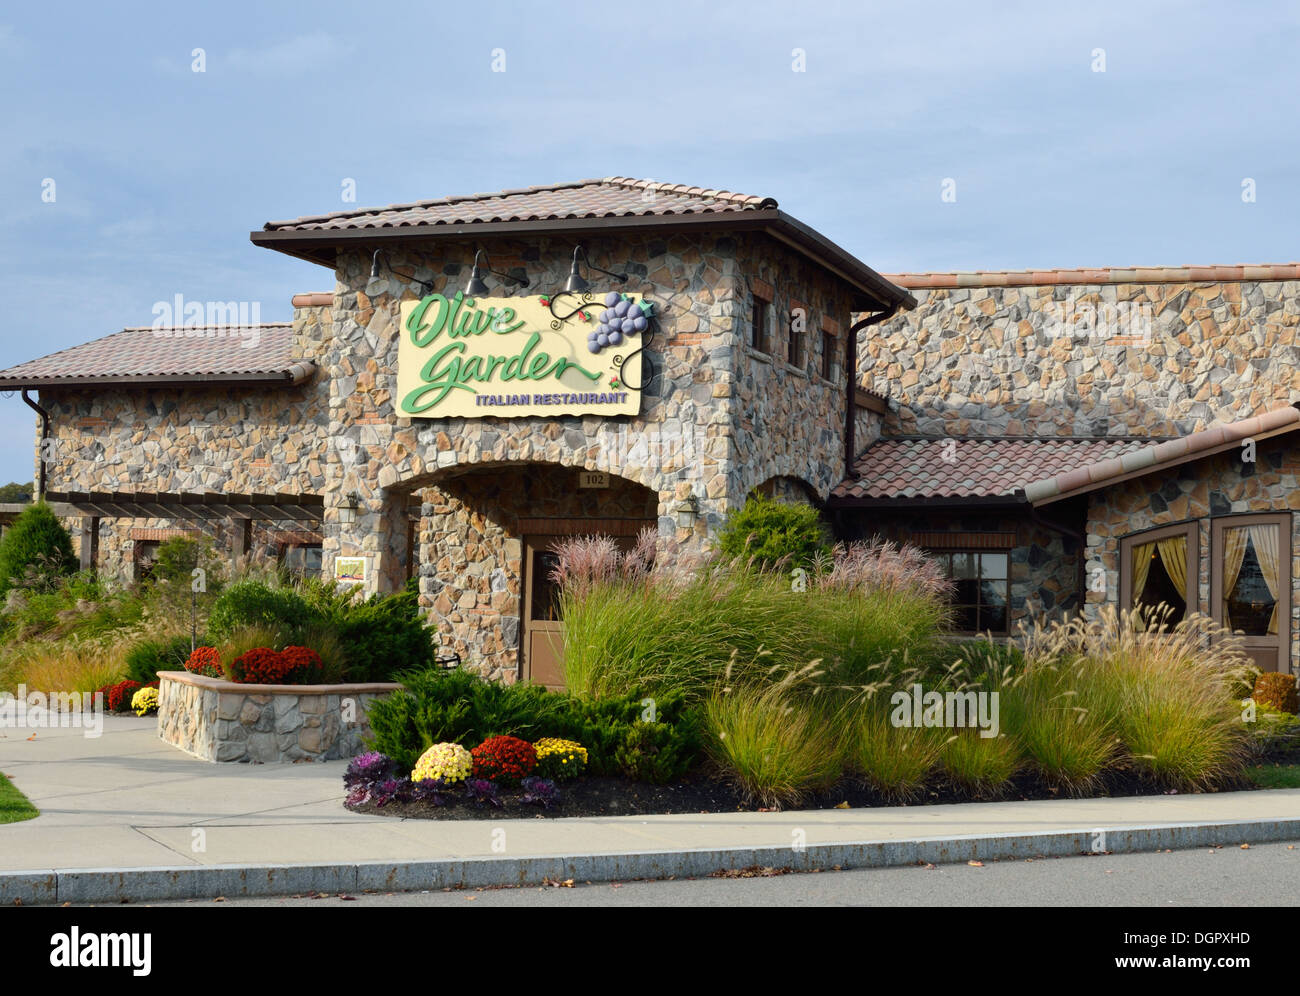 Exterior entrance of Olive Garden restaurant with sign Plymouth, Massachusetts USA Stock Photo